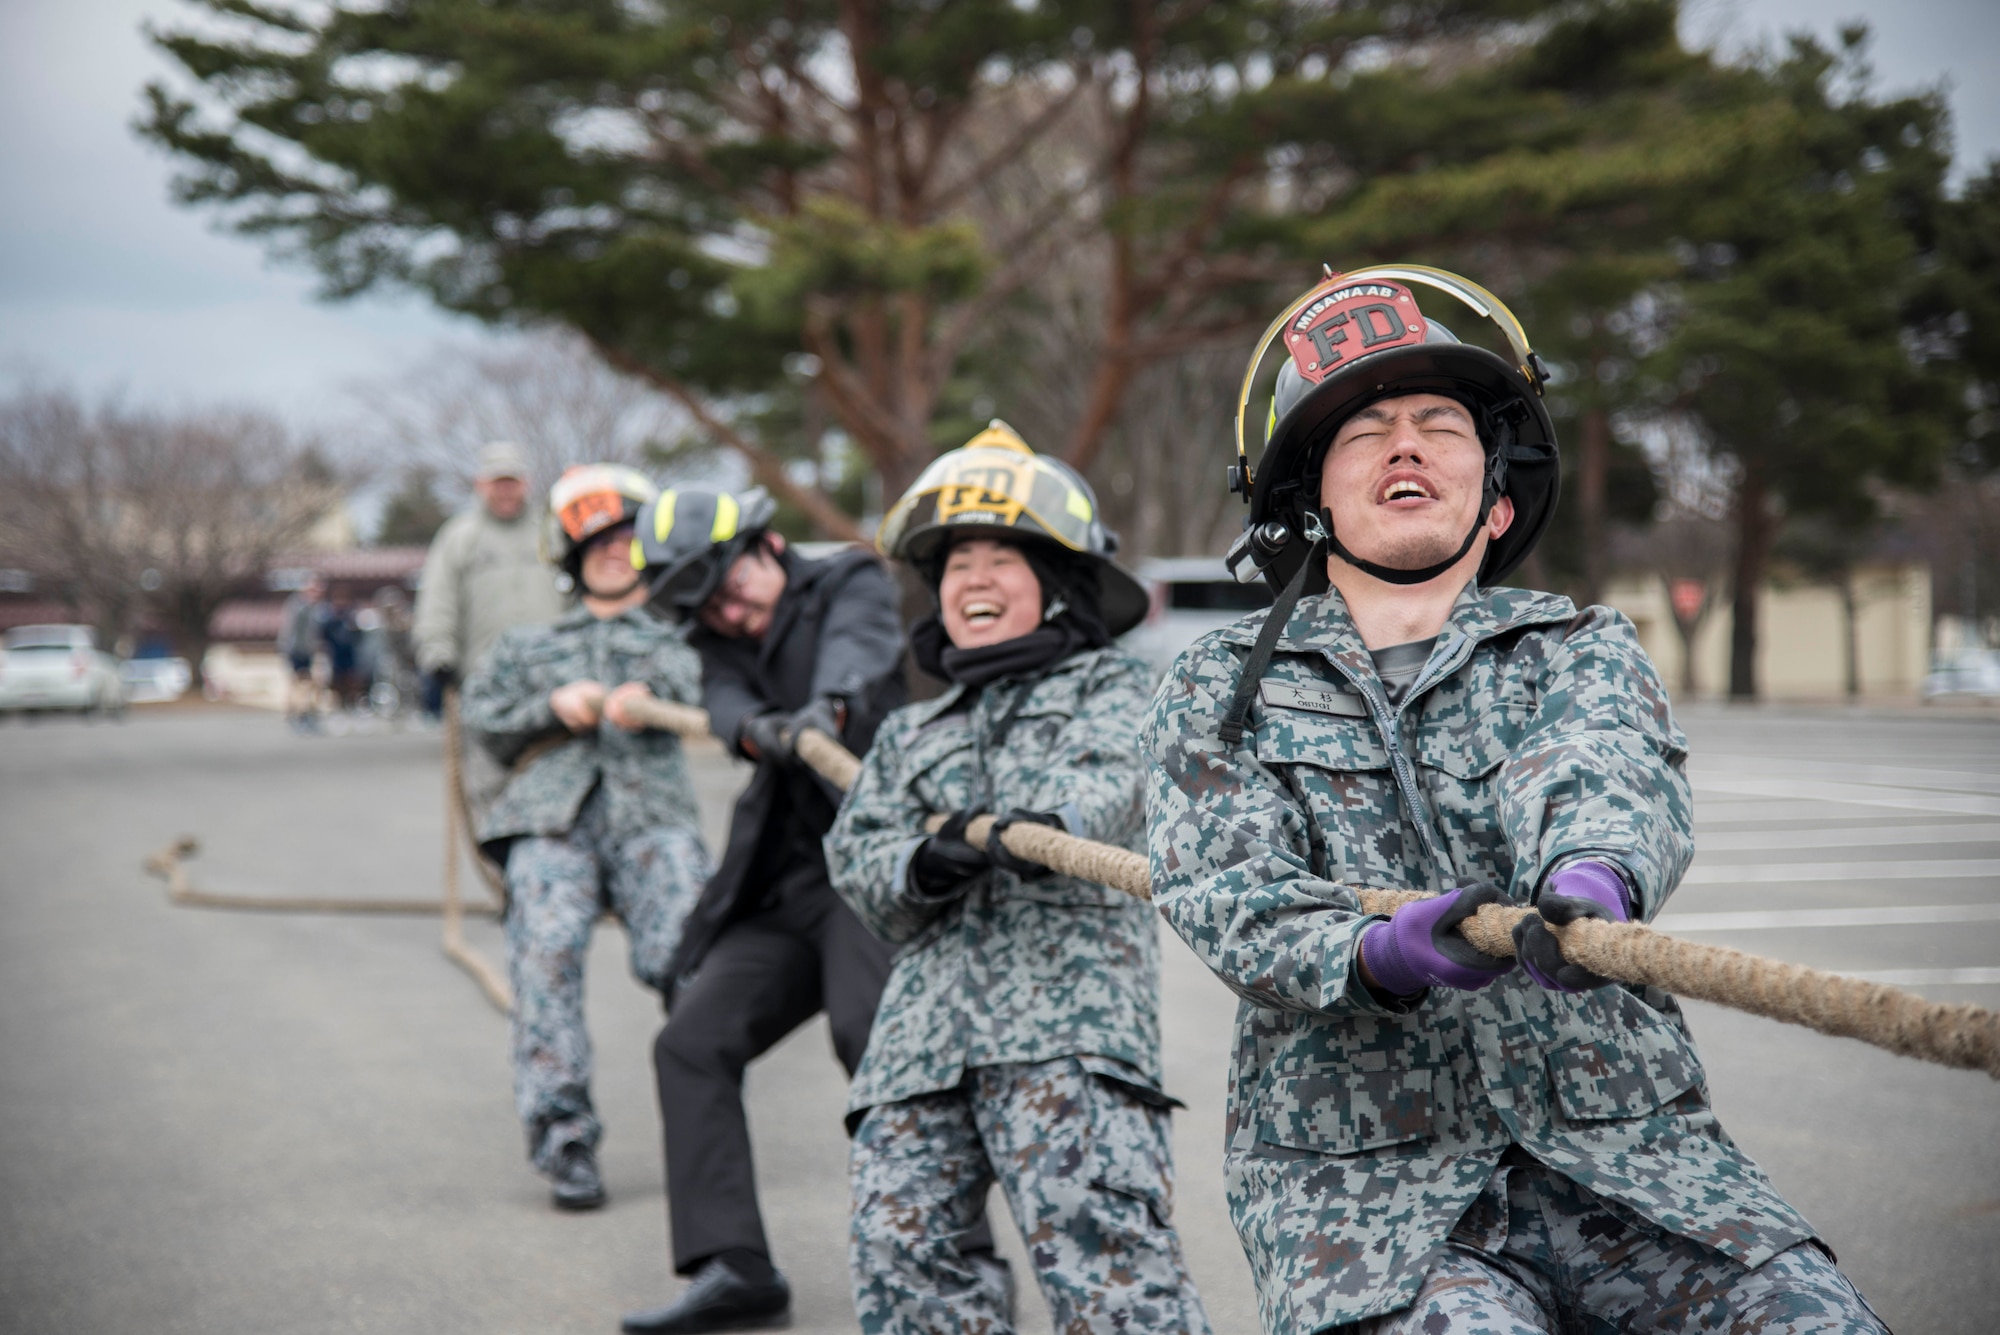 A team of Japanese Air Self-Defense Force members pull a firetruck during Wingman Day at Misawa Air Base, Japan, March 31, 2017. More than 10 teams entered the firetruck pull but team blank prevailed winning a grill. (U.S. Air Force Senior Airman Brittany A. Chase)